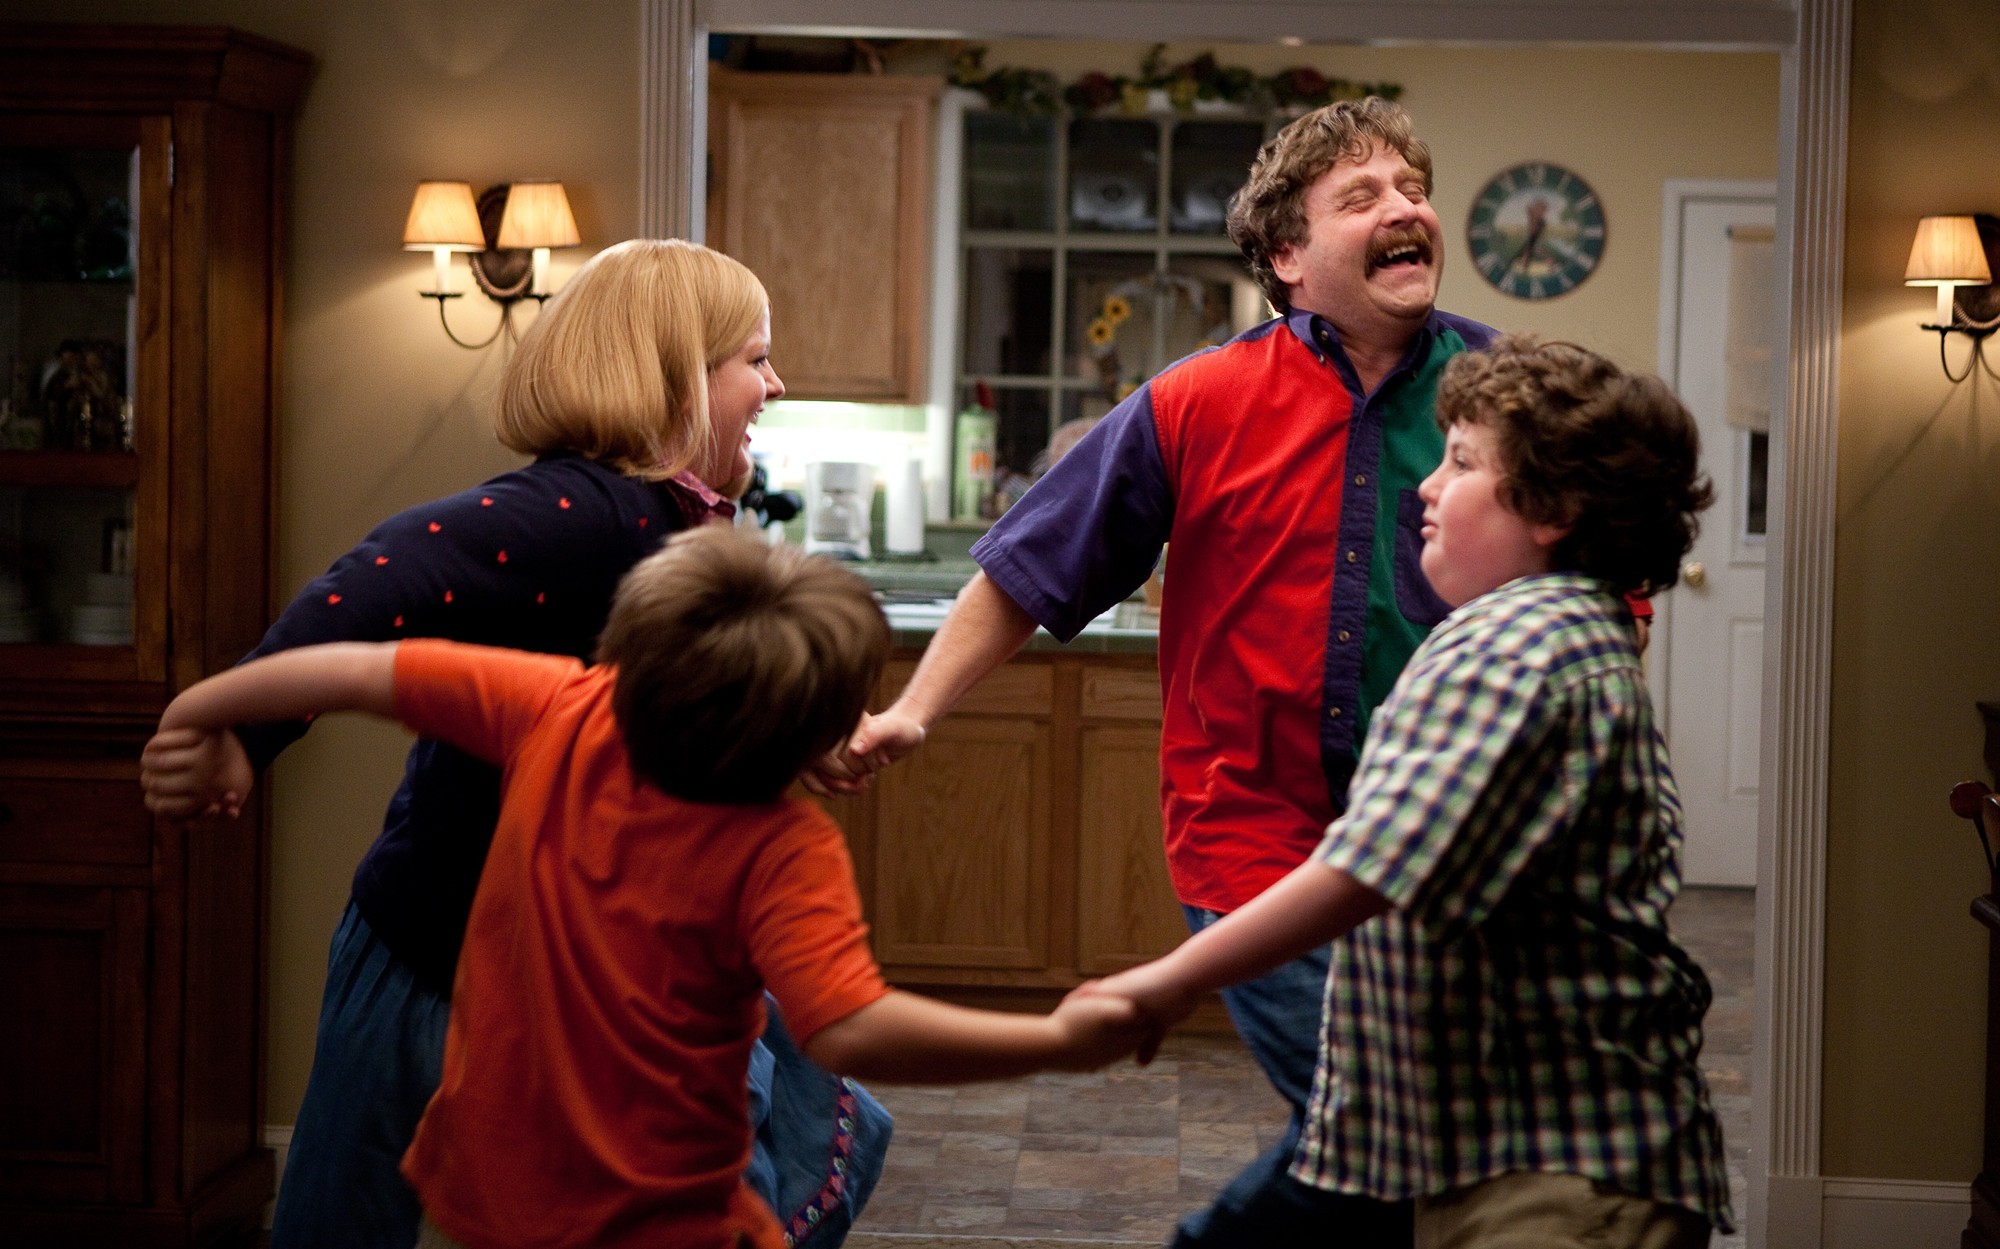 Sarah Baker, Kya Haywood, Zach Galifianakis and Grant Goodman in Warner Bros. Pictures' The Campaign (2012)